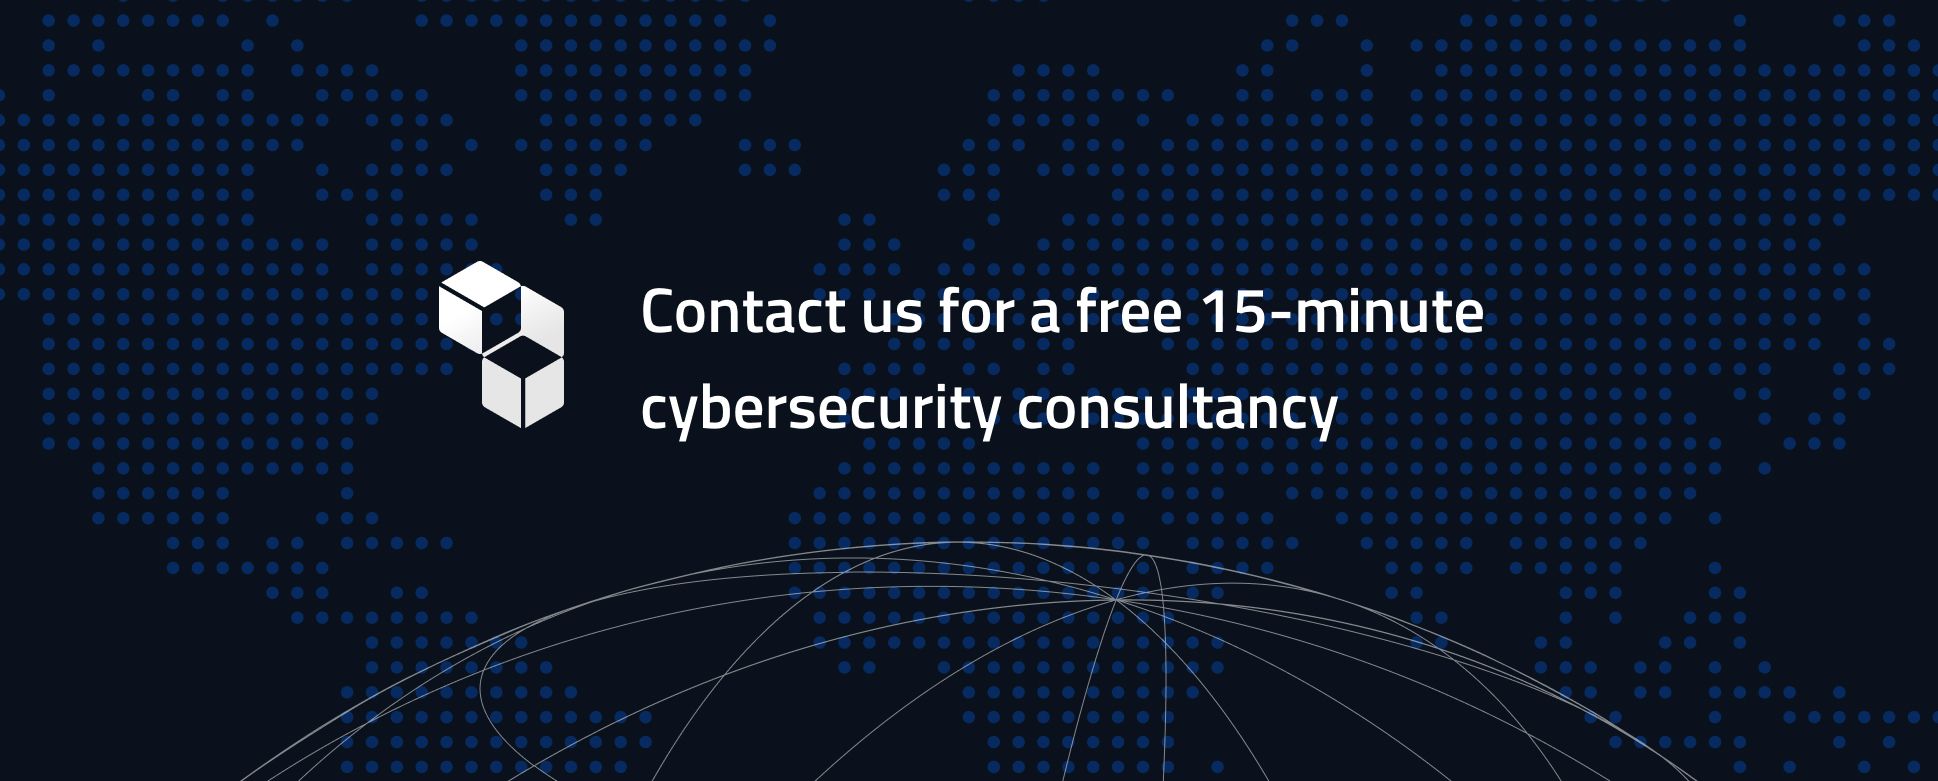 contact us for a free 15-minute cybersecurity consultancy